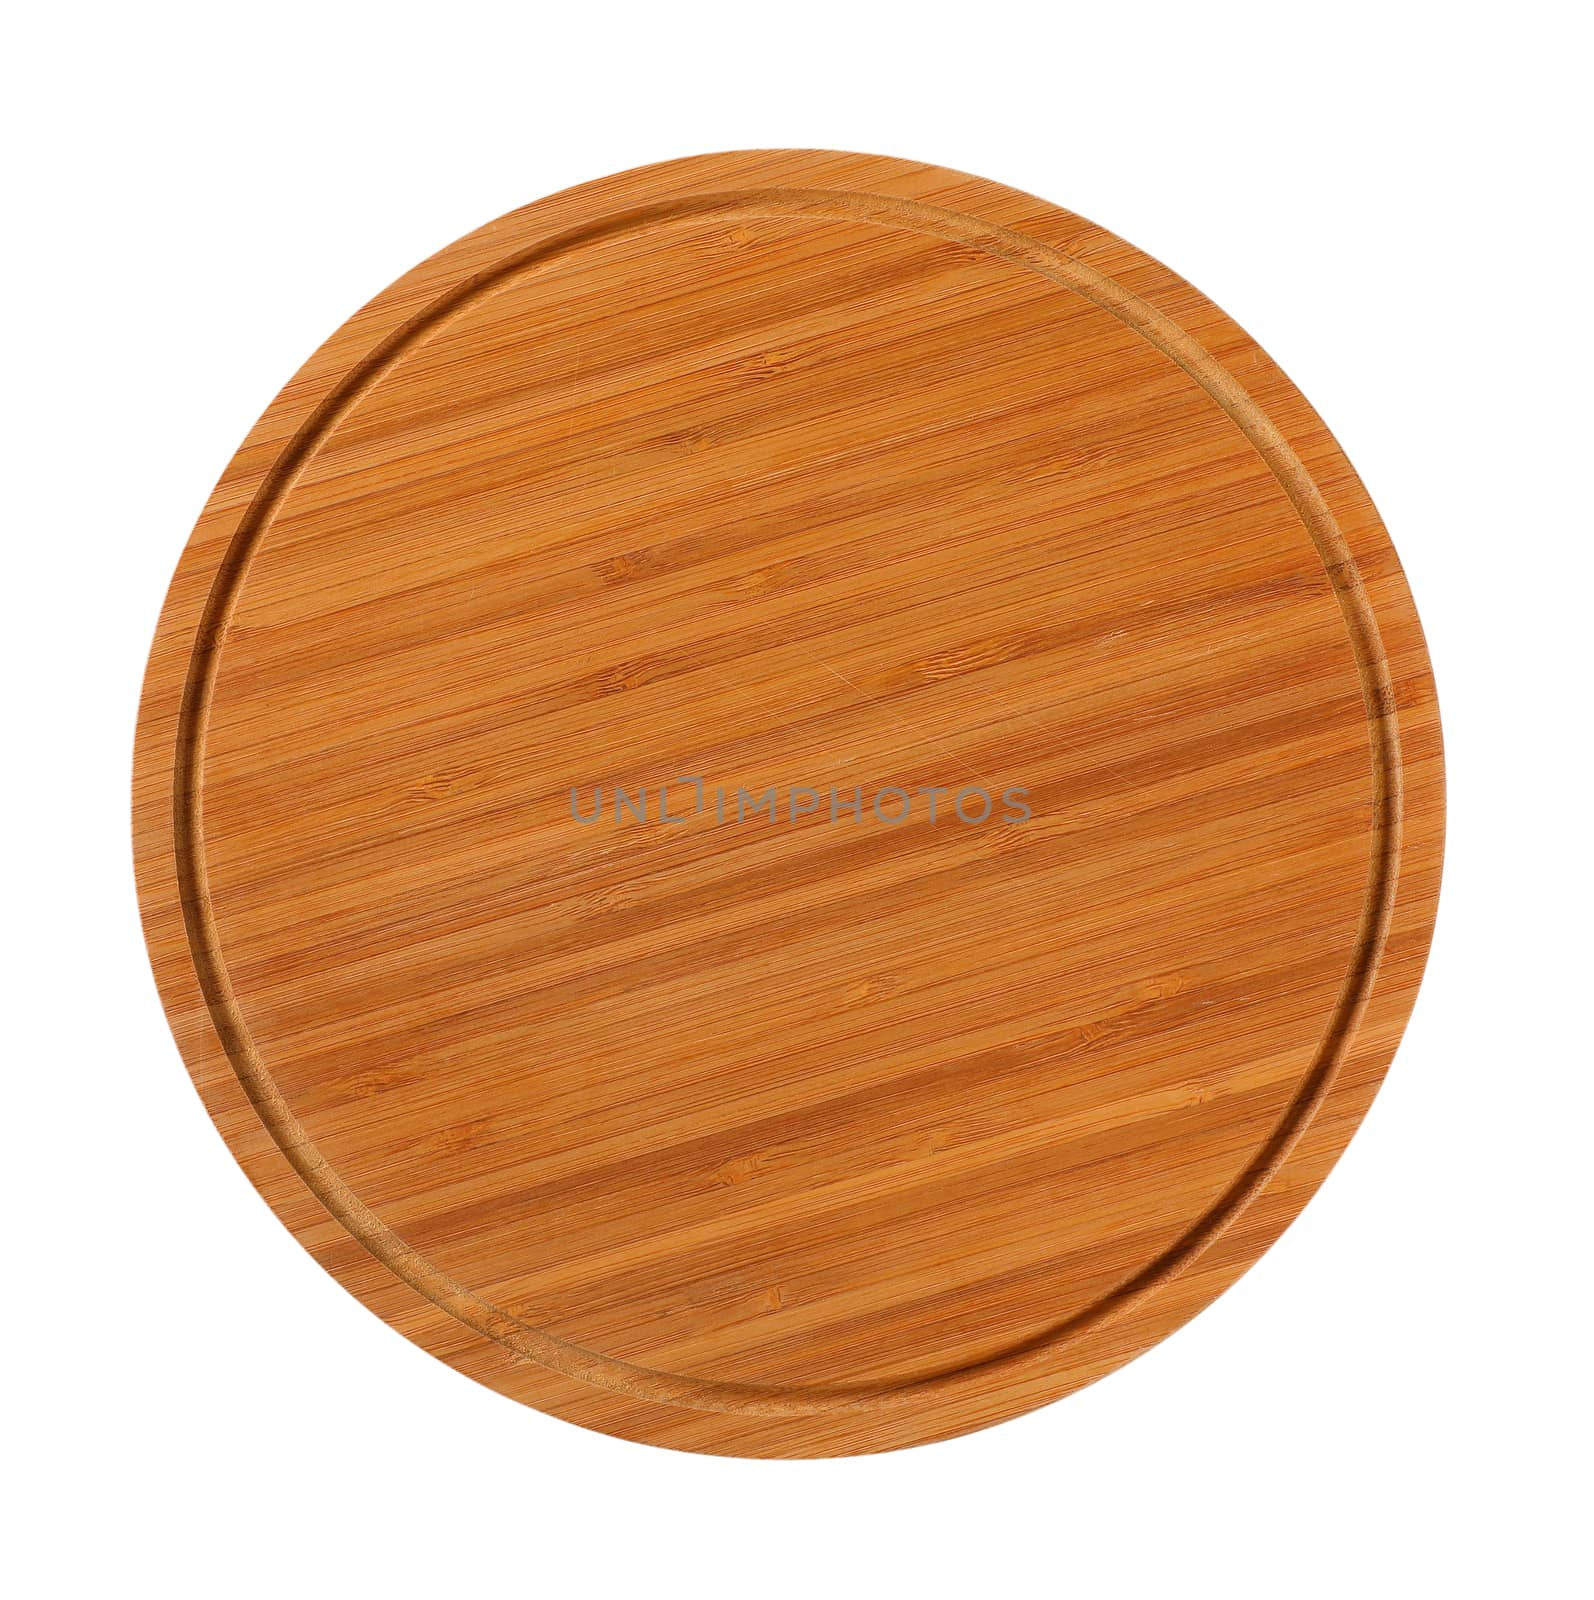 round wooden cutting board by Digifoodstock